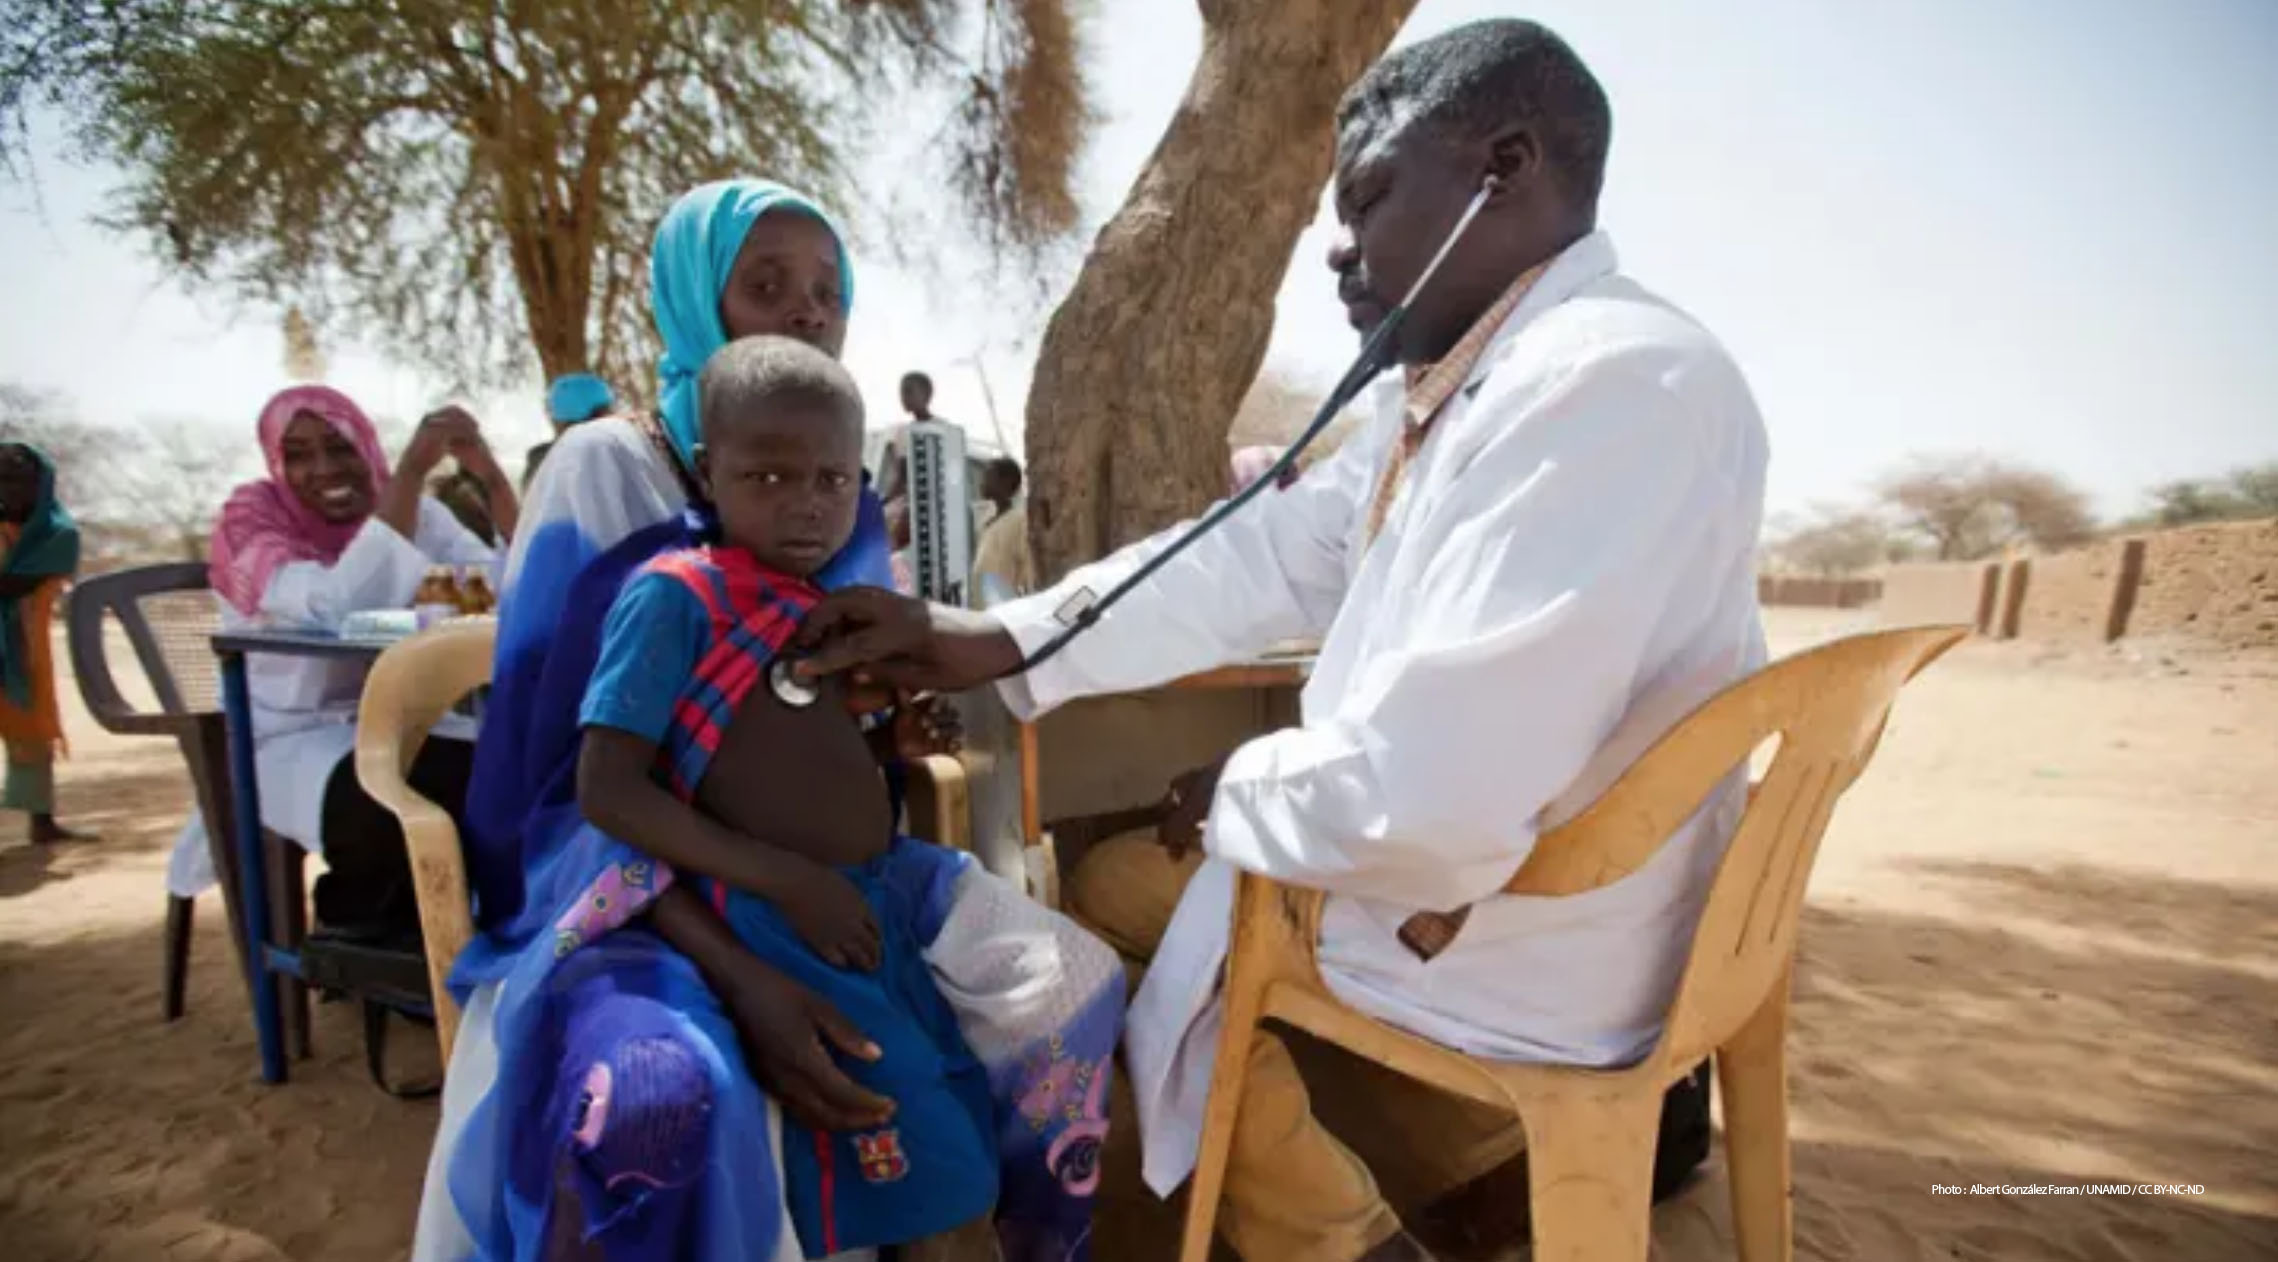 Doctor Ismail Abdurrahman attends to a child at a temporary clinic for internally displaced persons in North Darfur, Sudan. Photo by Albert González Farran / UNAMID / CC BY-NC-ND